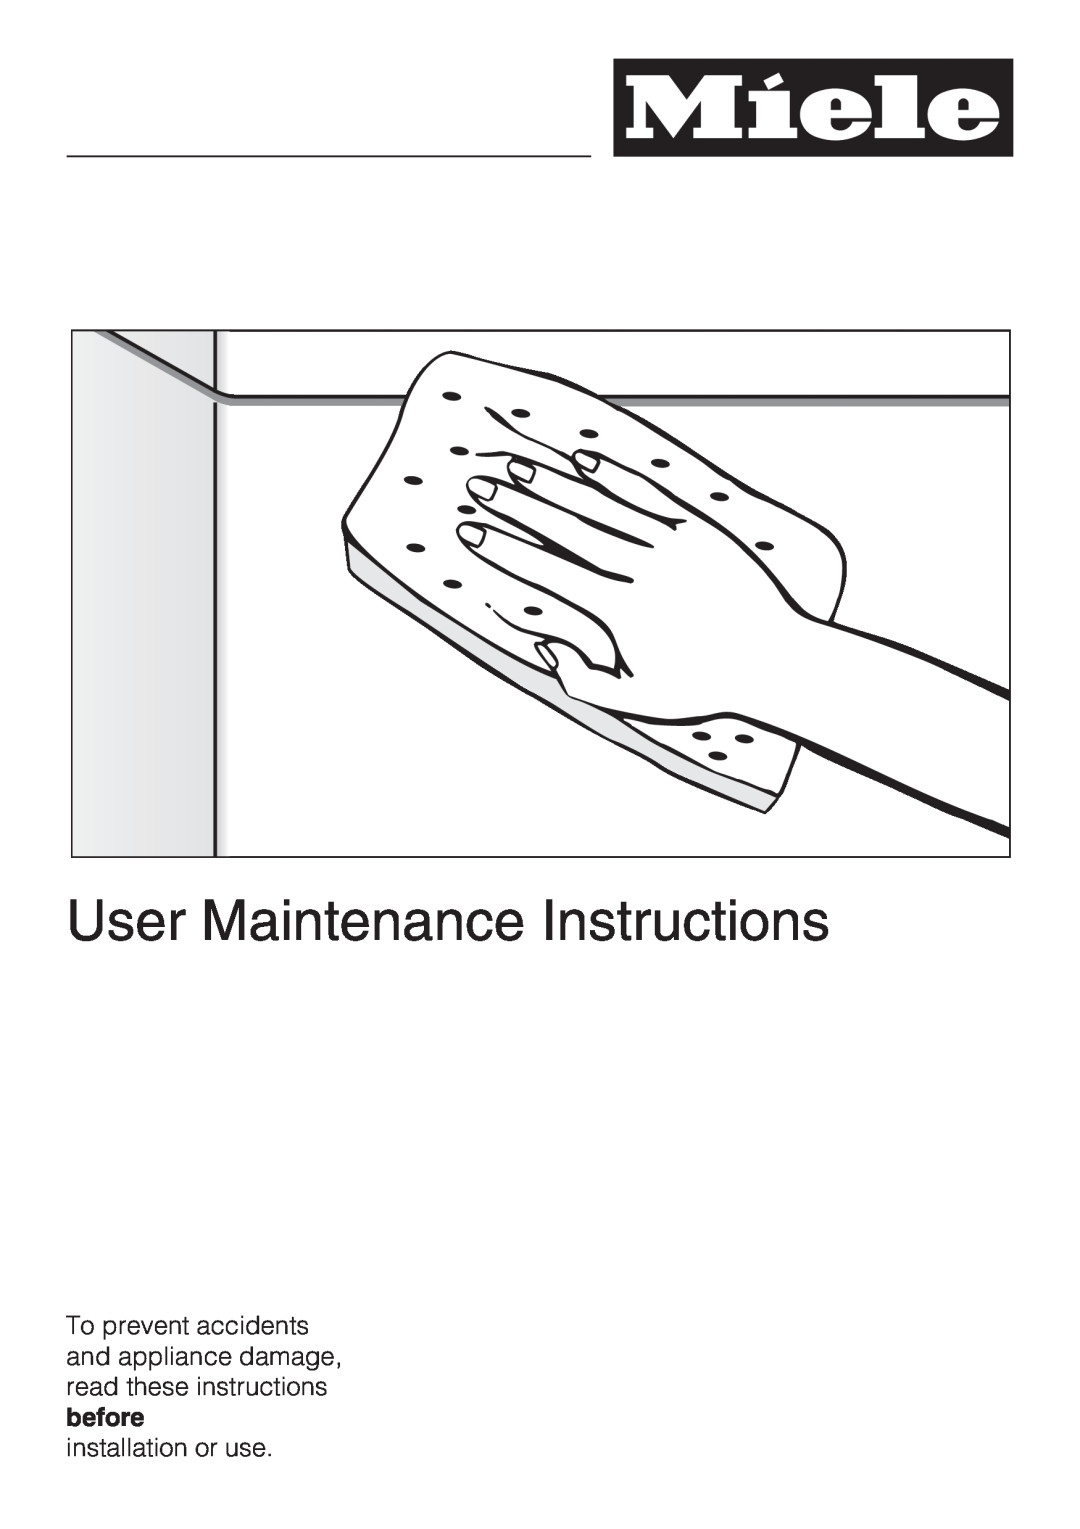 Miele G 1181, G 2181 operating instructions User Maintenance Instructions, installation or use 